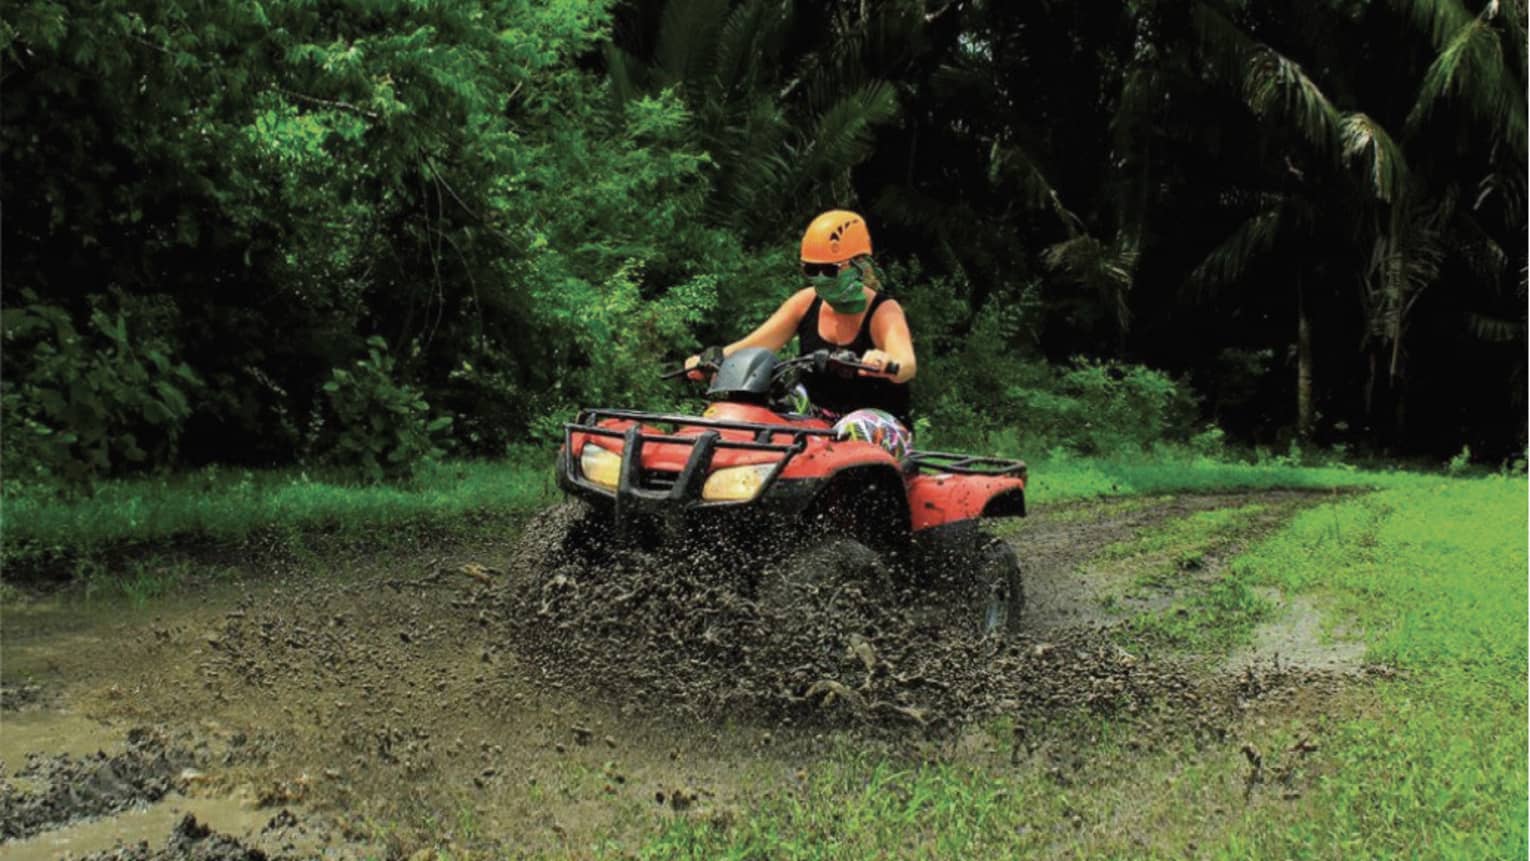 Person wearing a black tank top and bright orange helmet rides through the mud on a red ATV